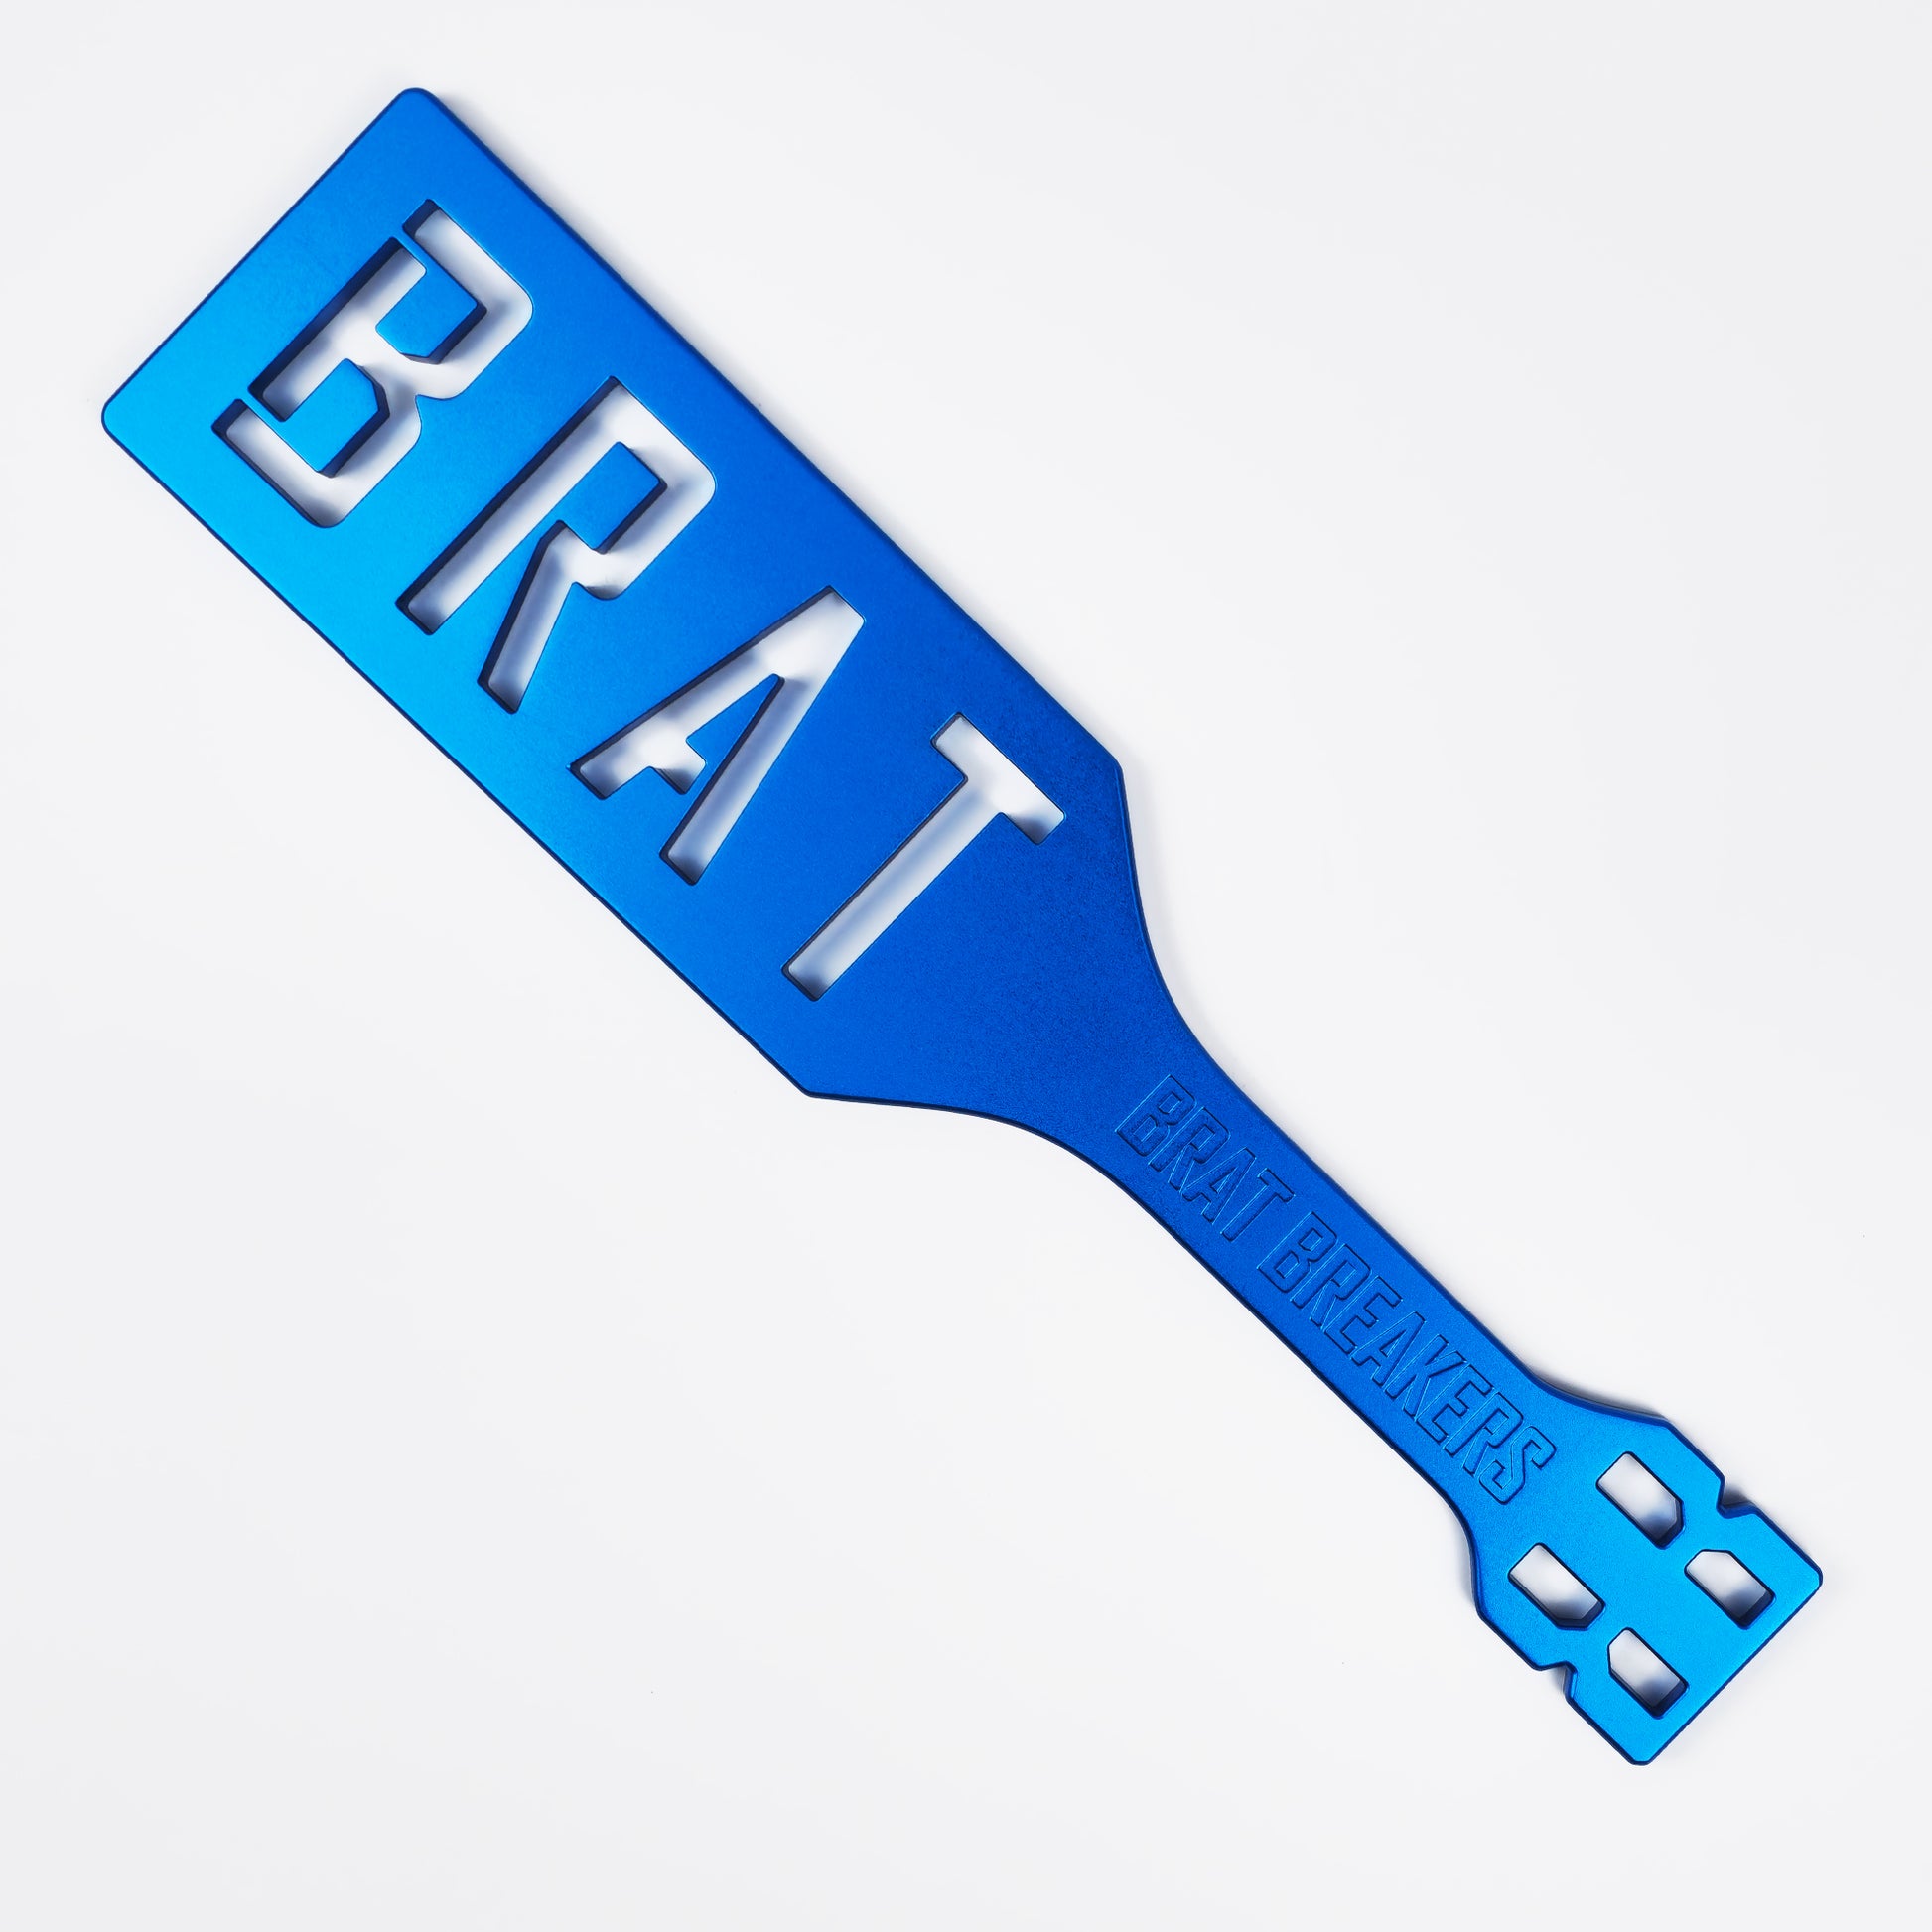 Blue Steel Spanking Paddle with BRAT cut out made by Brat Breakers